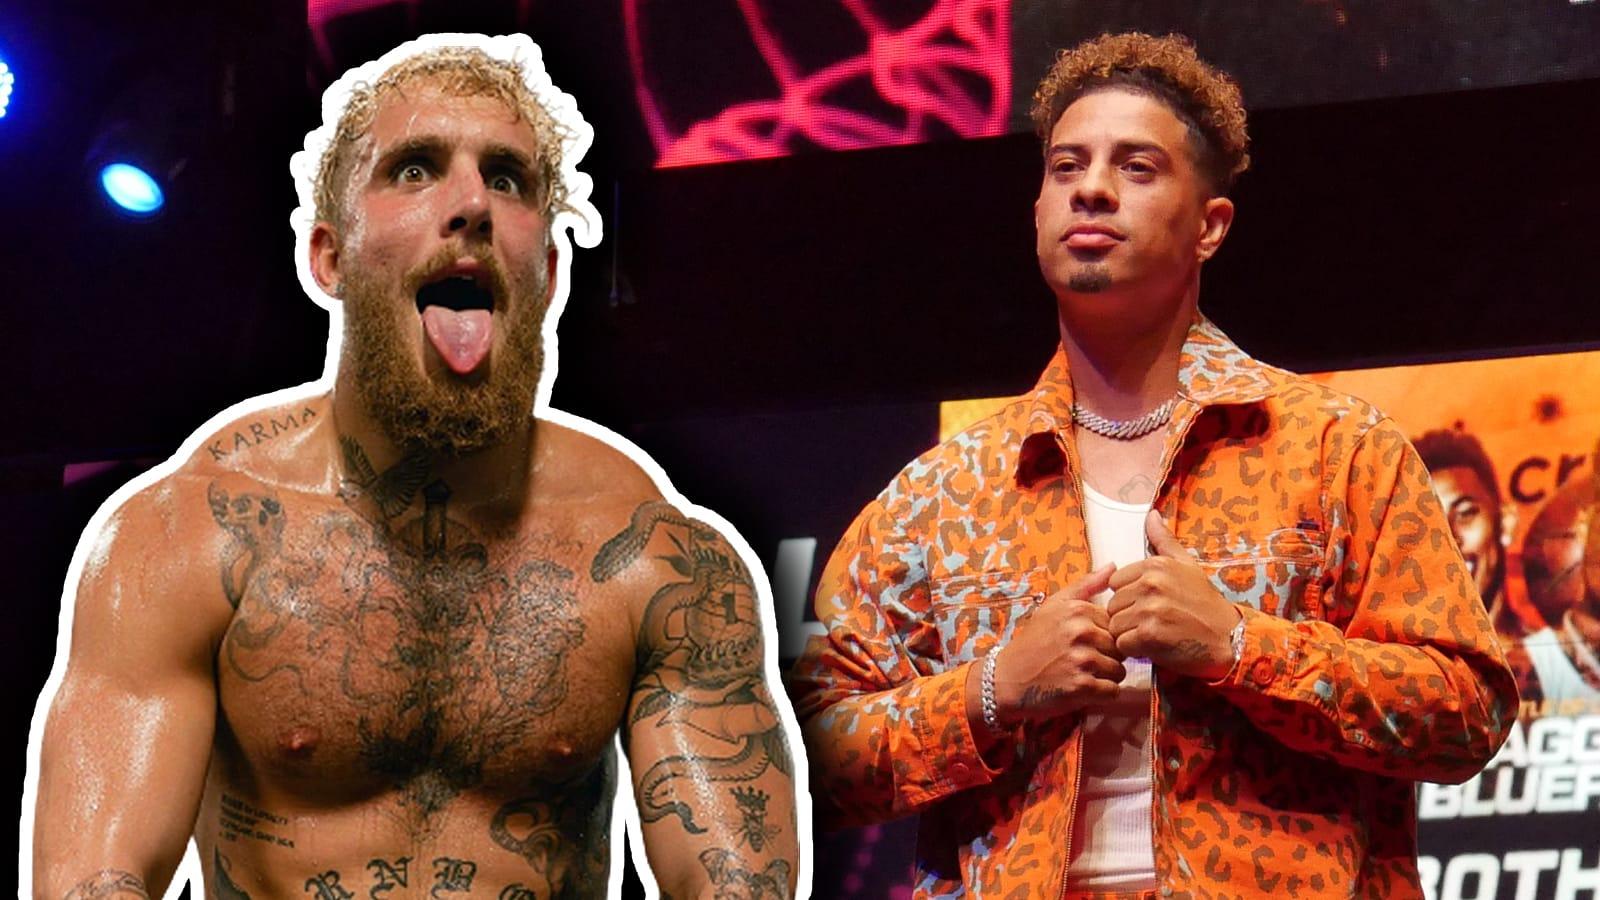 Austin McBroom open to Jake Paul fight after 2021 beef